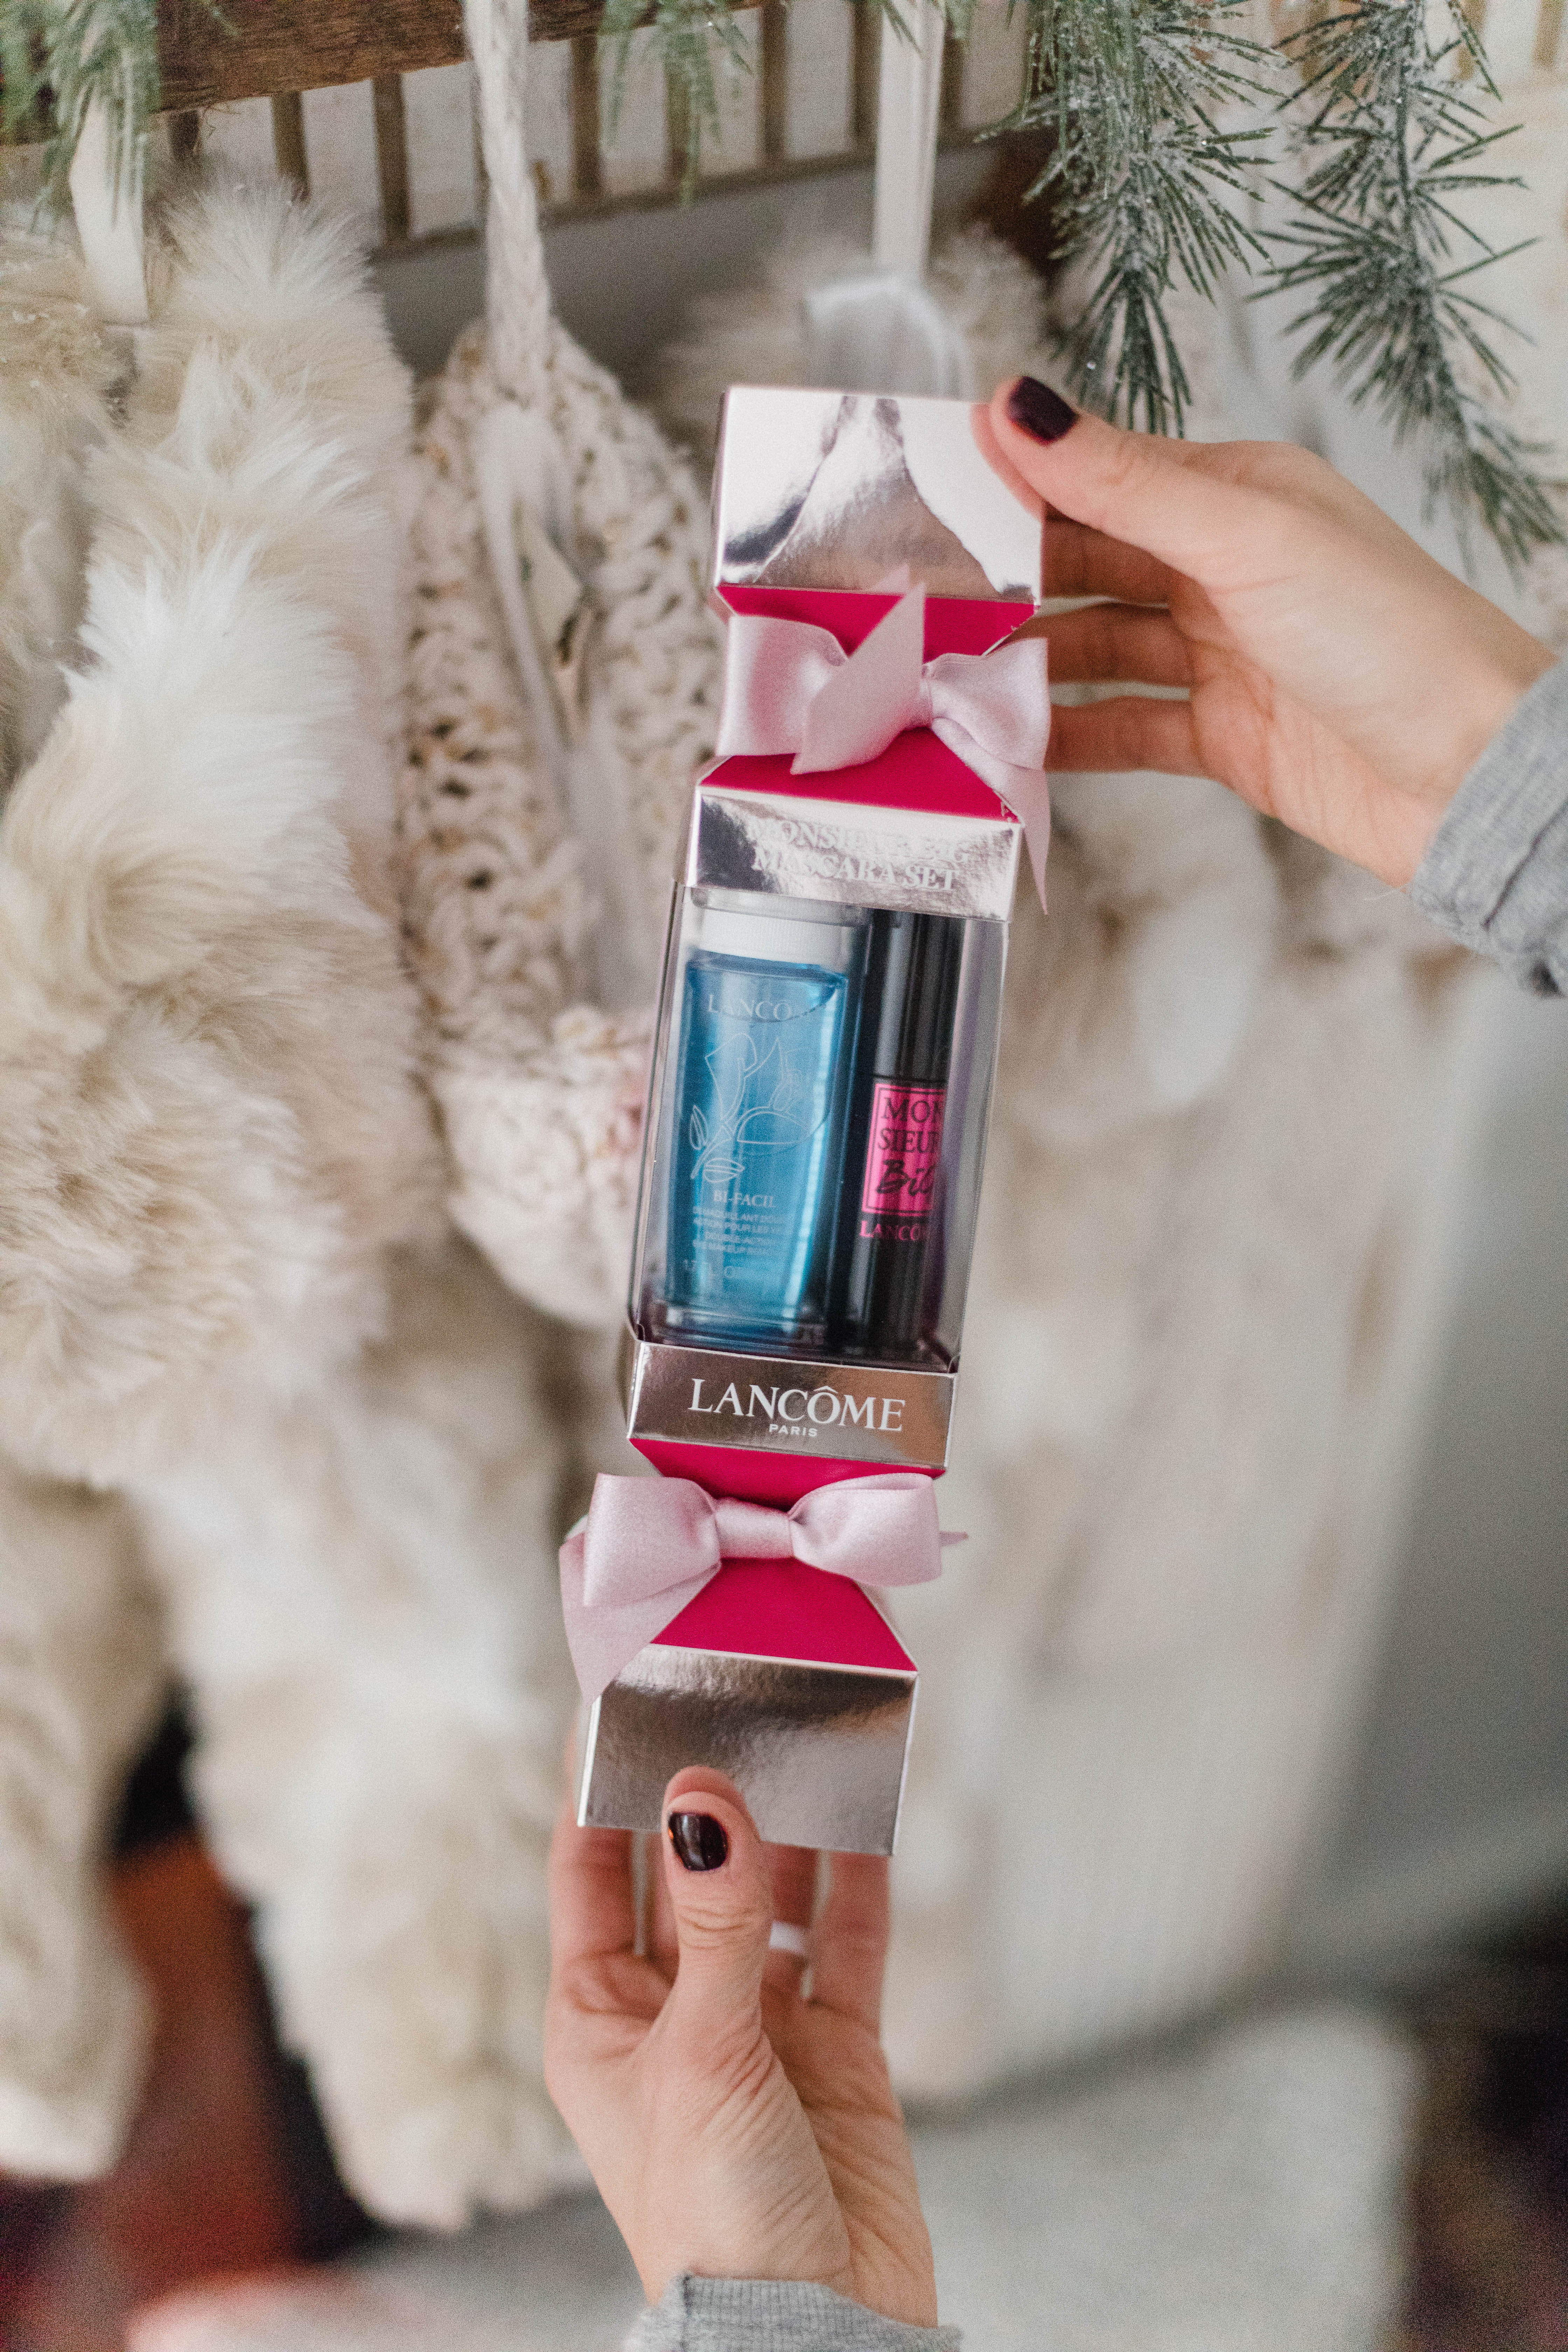 Connecticut life and style blogger Lauren McBride shares beauty gift ideas under $50 including budget-friendly stocking stuffers and gift exchange ideas.